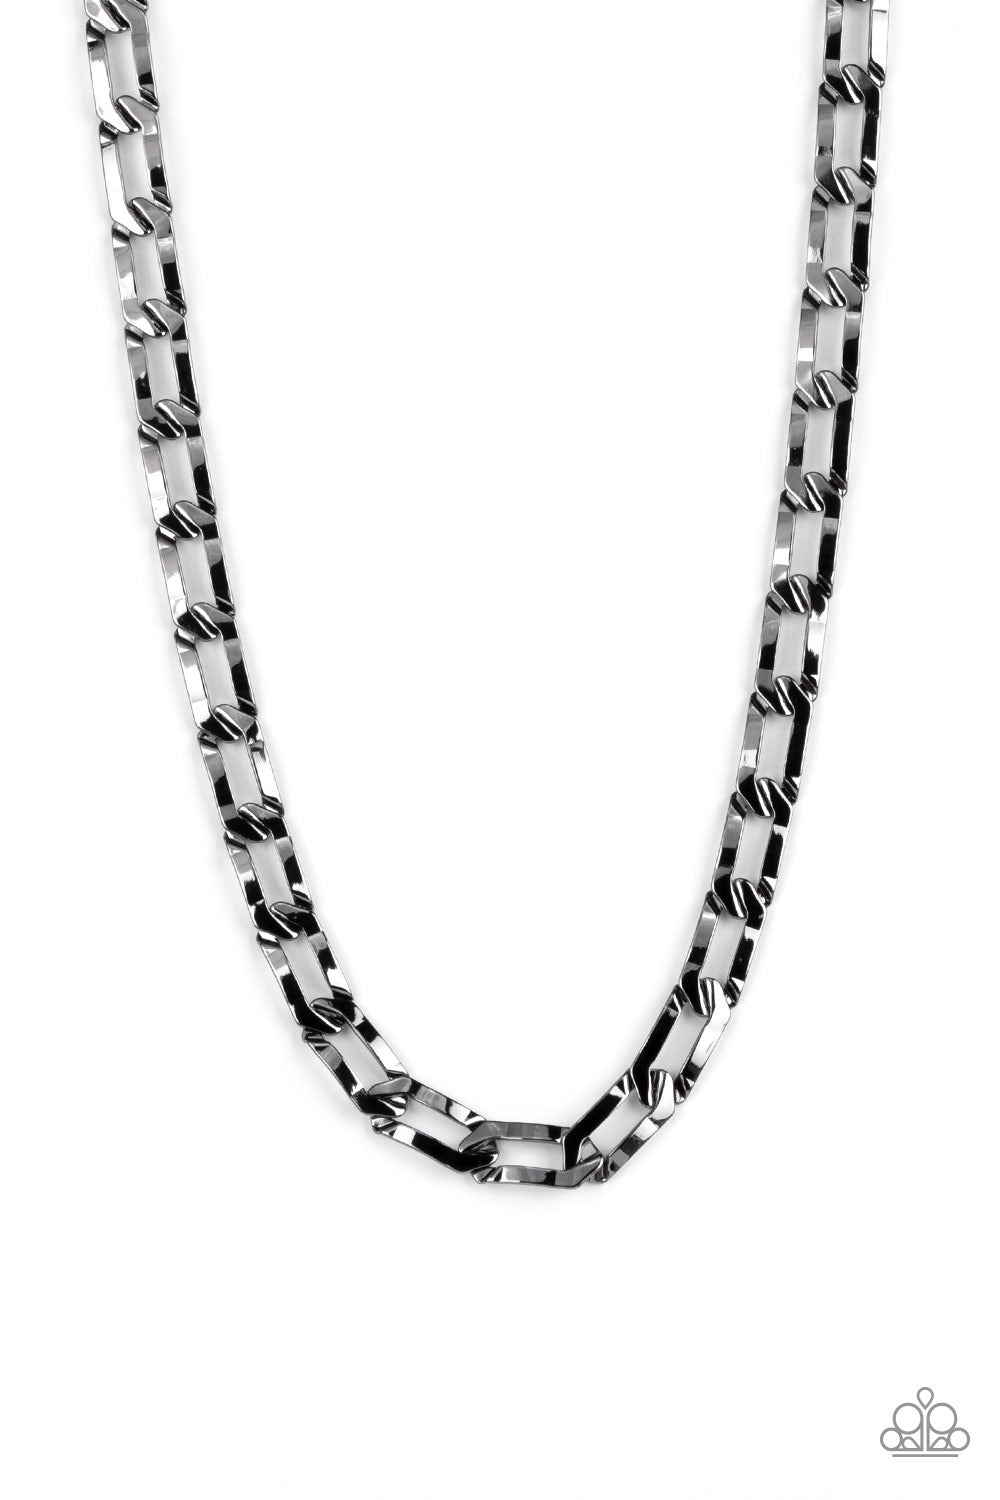 Paparazzi Accessories - Crimped gunmetal oval links boldly interconnect across the chest, creating a classic urban look. Features an adjustable clasp closure.